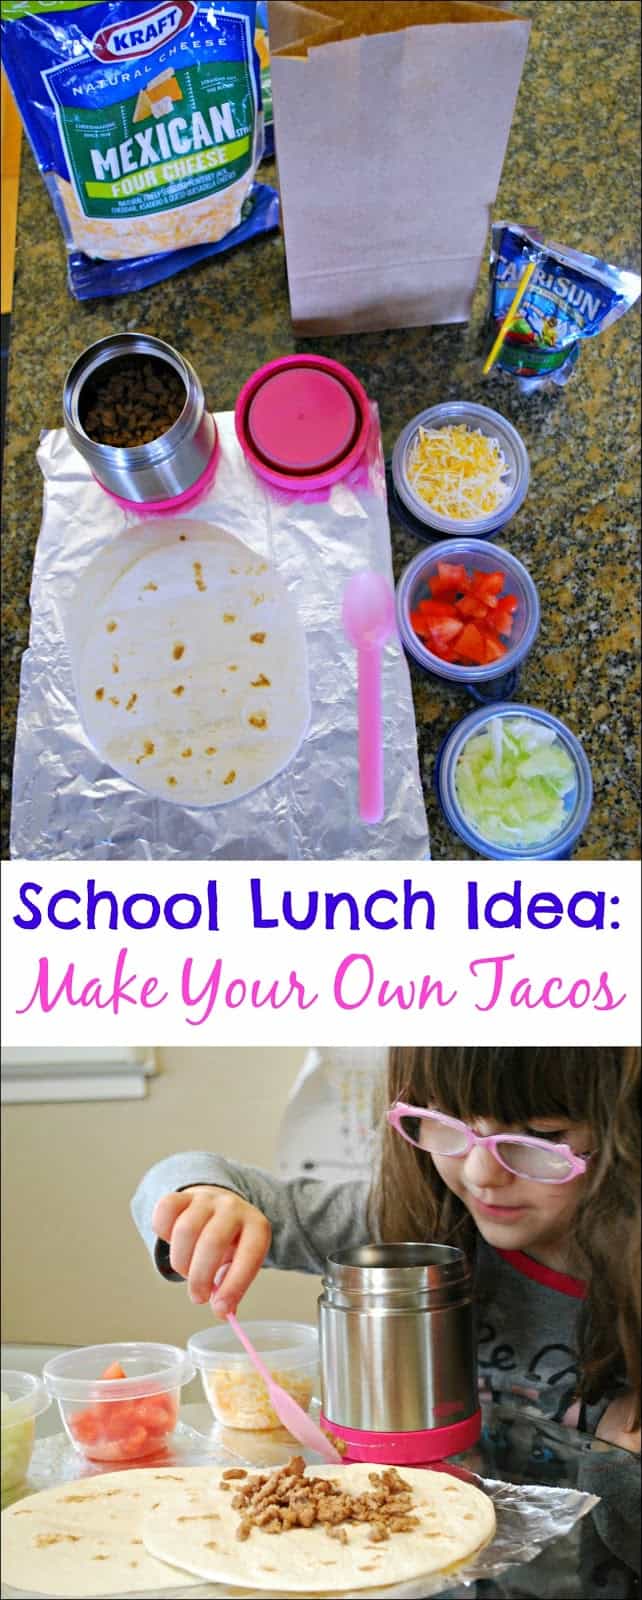 School Lunch Idea: Make Your Own Tacos - Are your kids tired of the same old school lunches? Let them build their own tacos. #ad